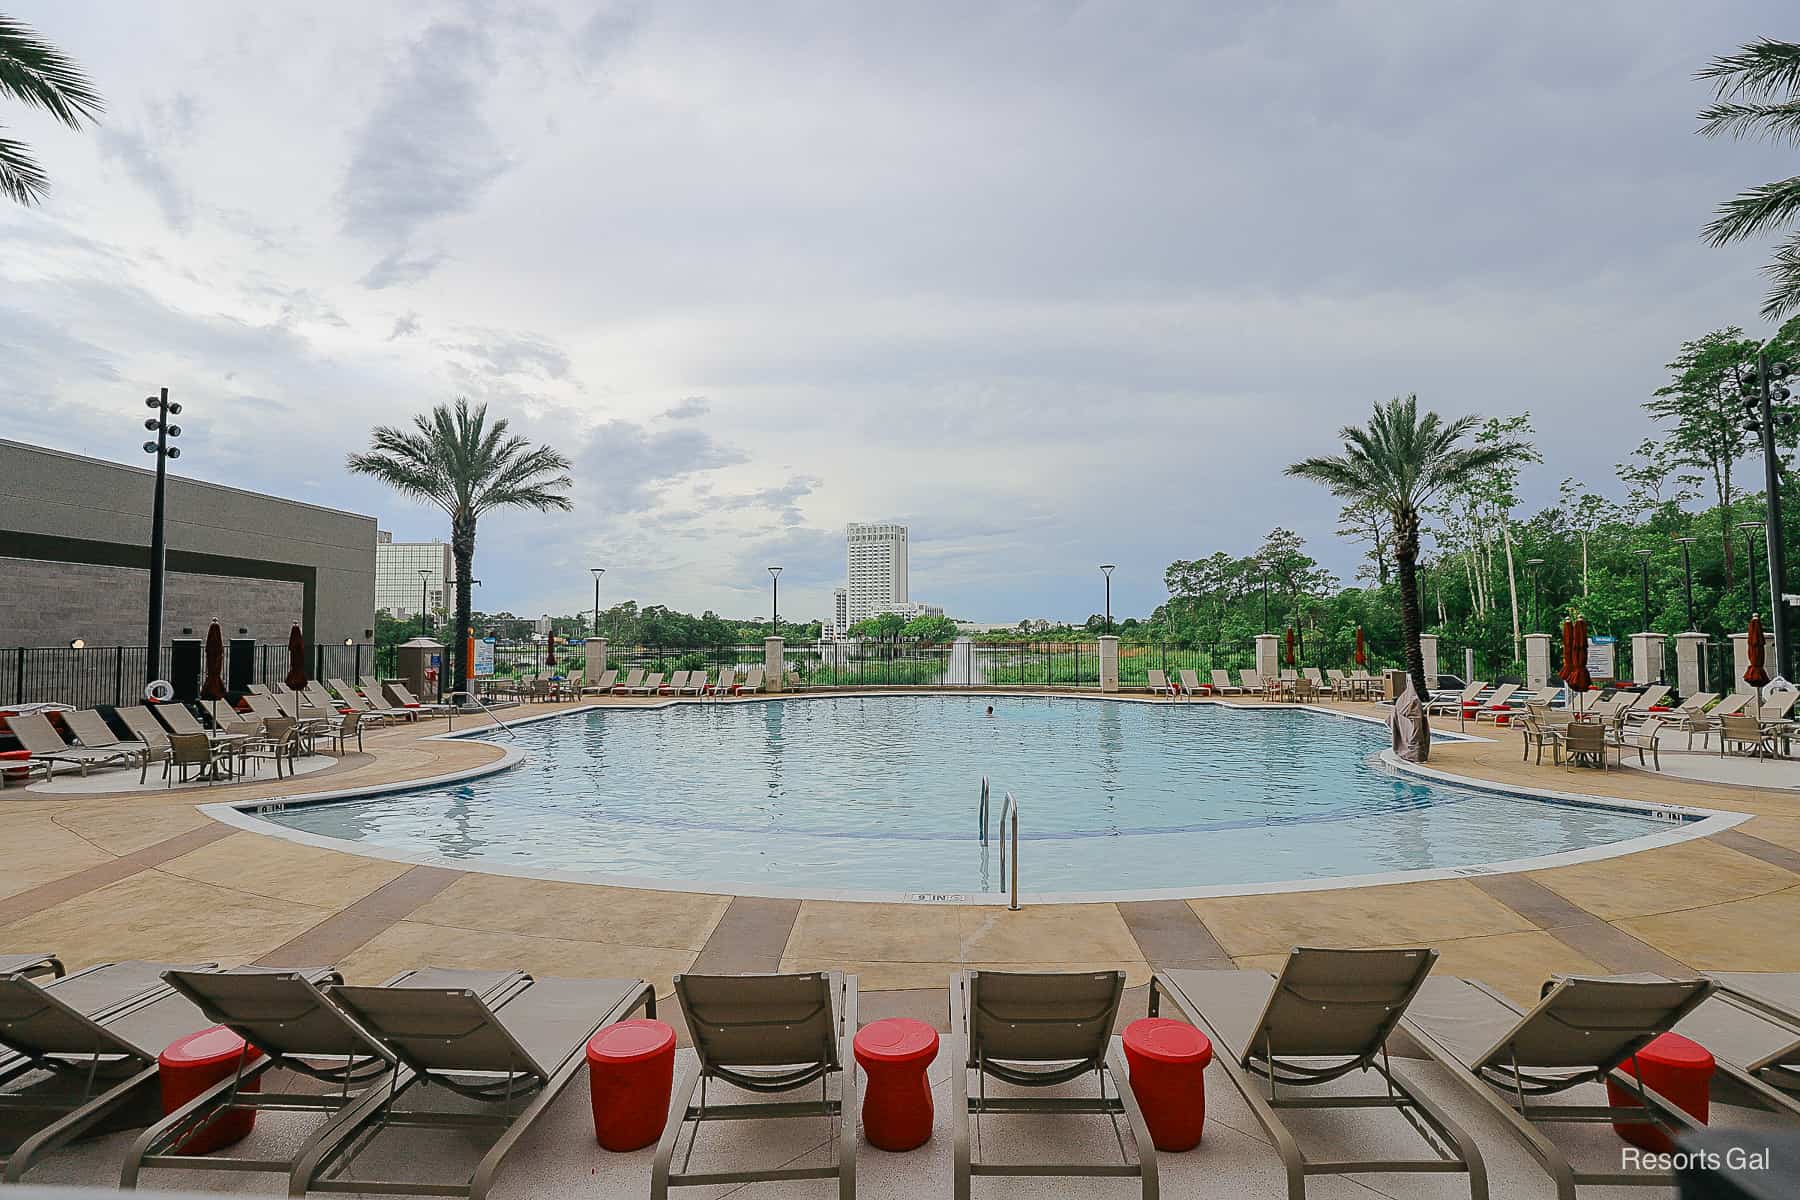 The pool faces a lake at the Drury Plaza Hotel at Disney Springs. 